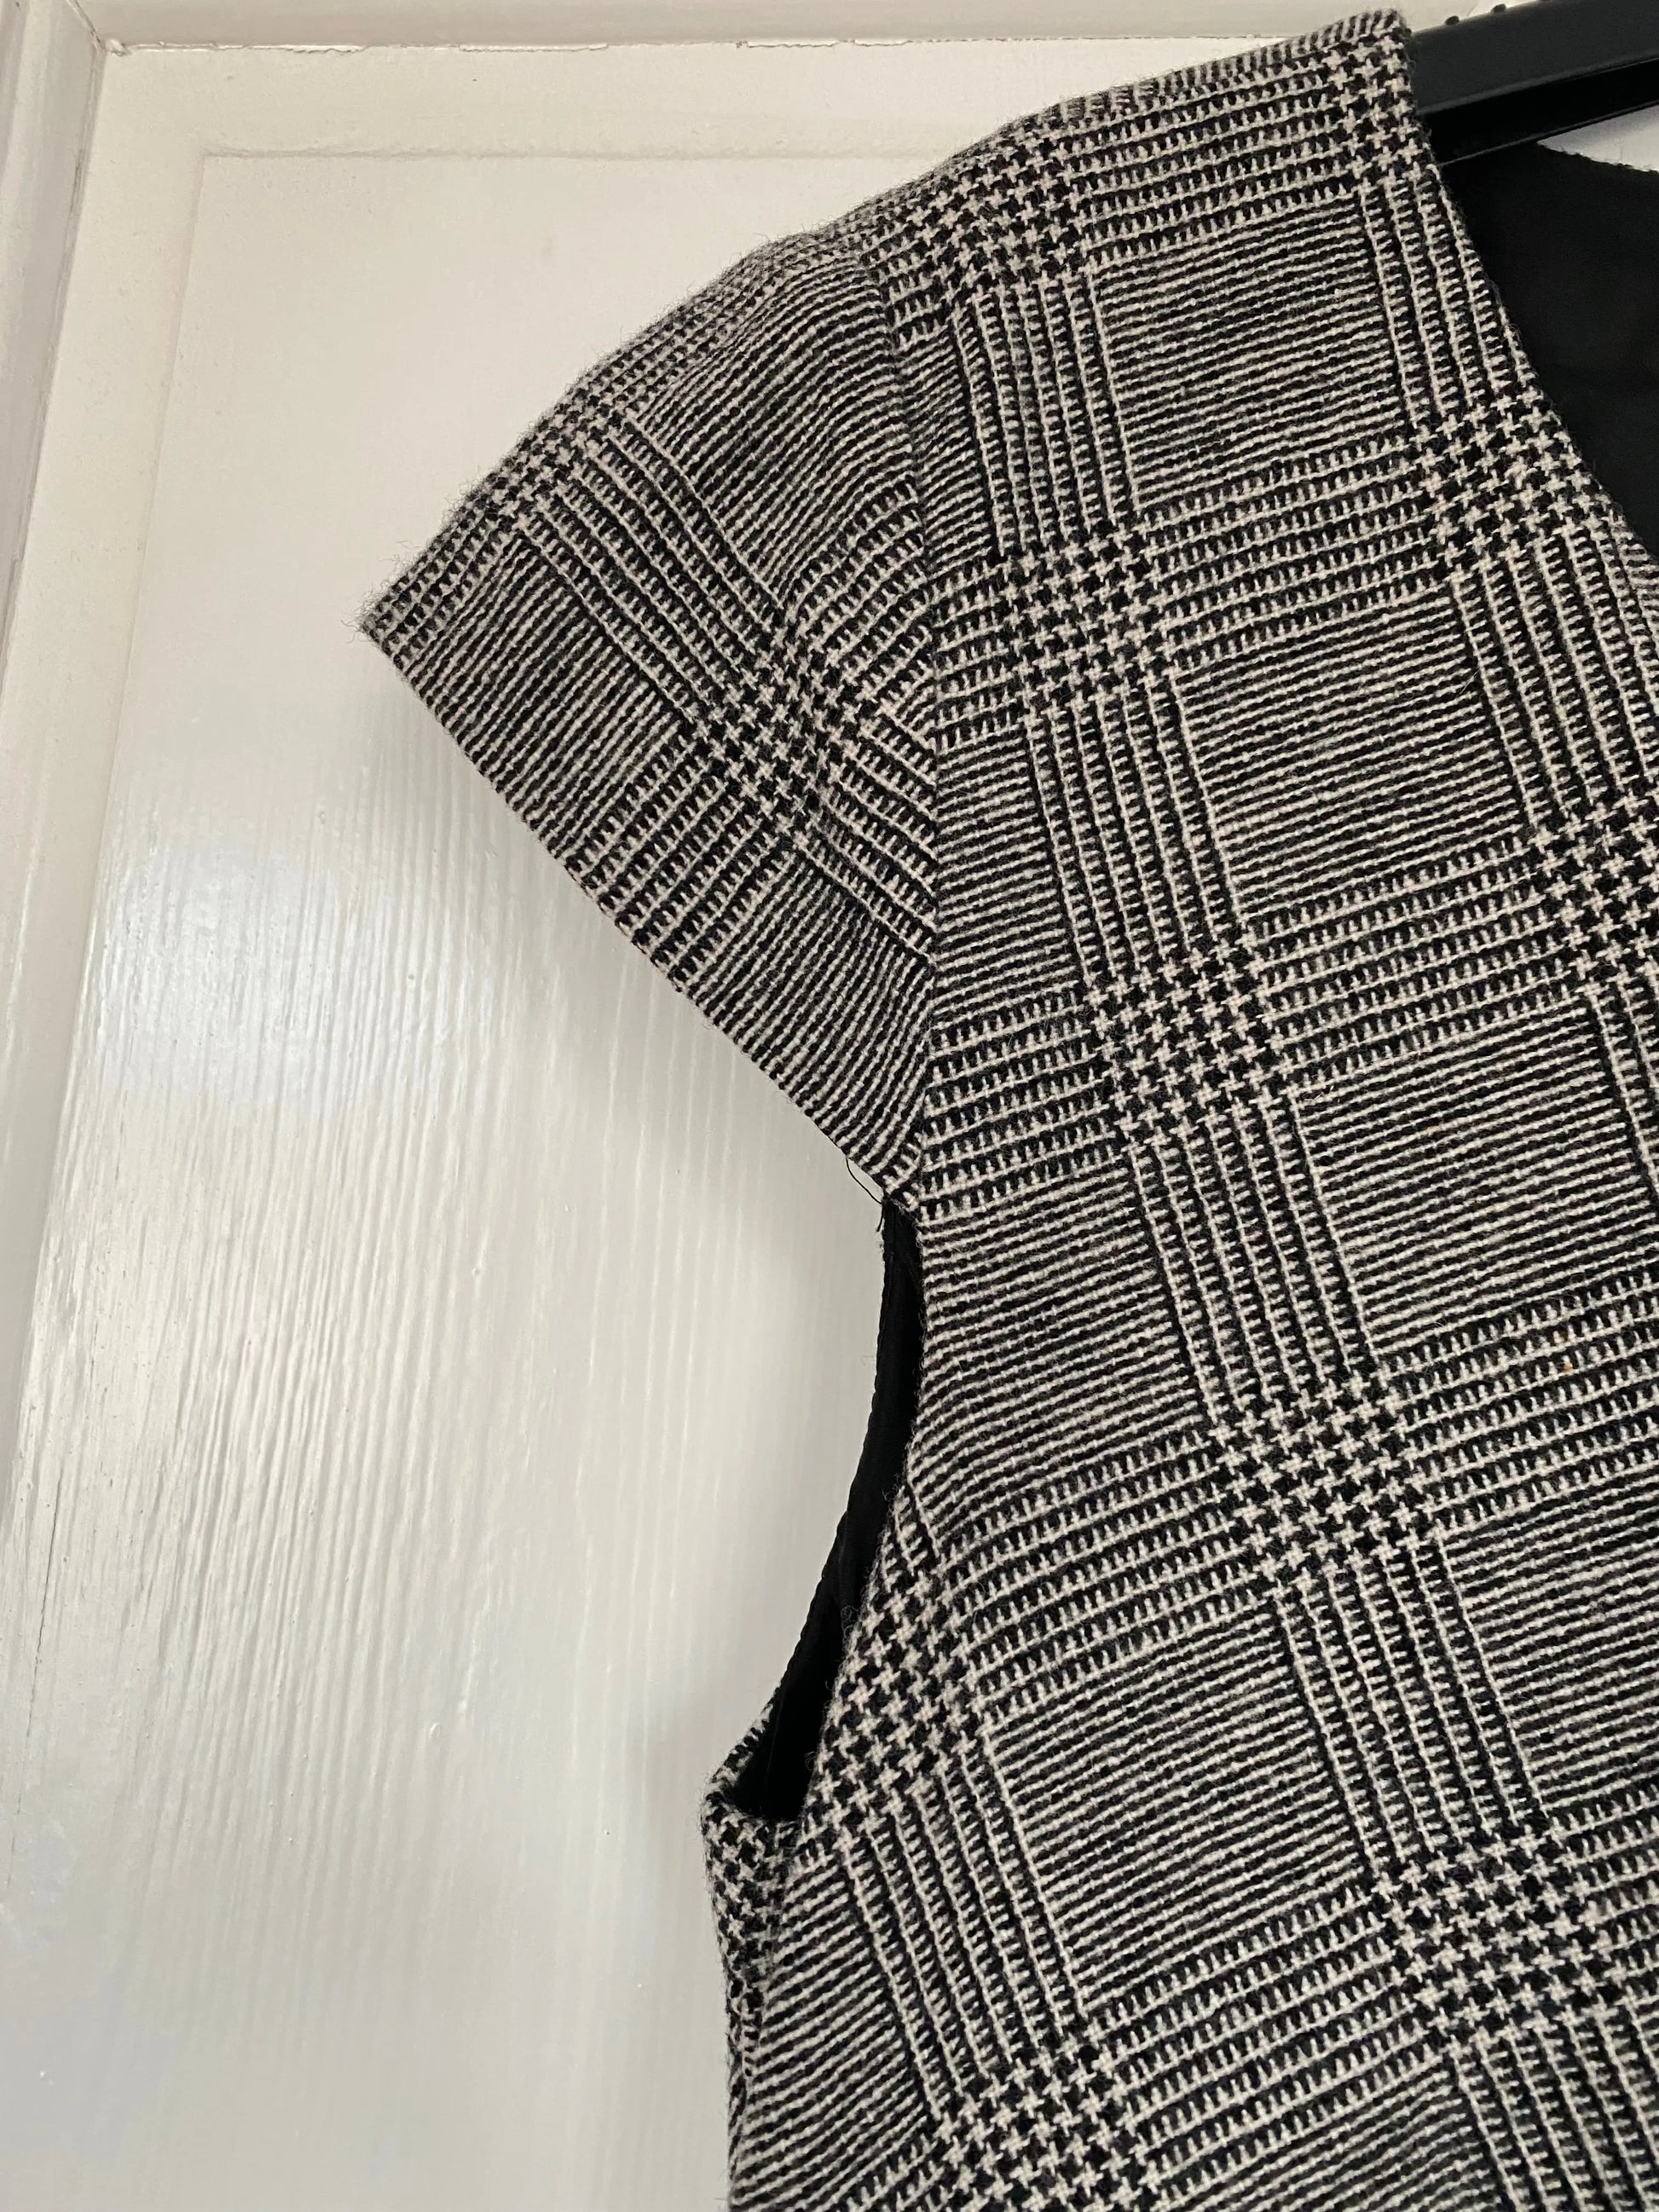 Phase Eight Wool Mix Check Dress in Black & White Size 12. Slay the office! Personal wardrobe